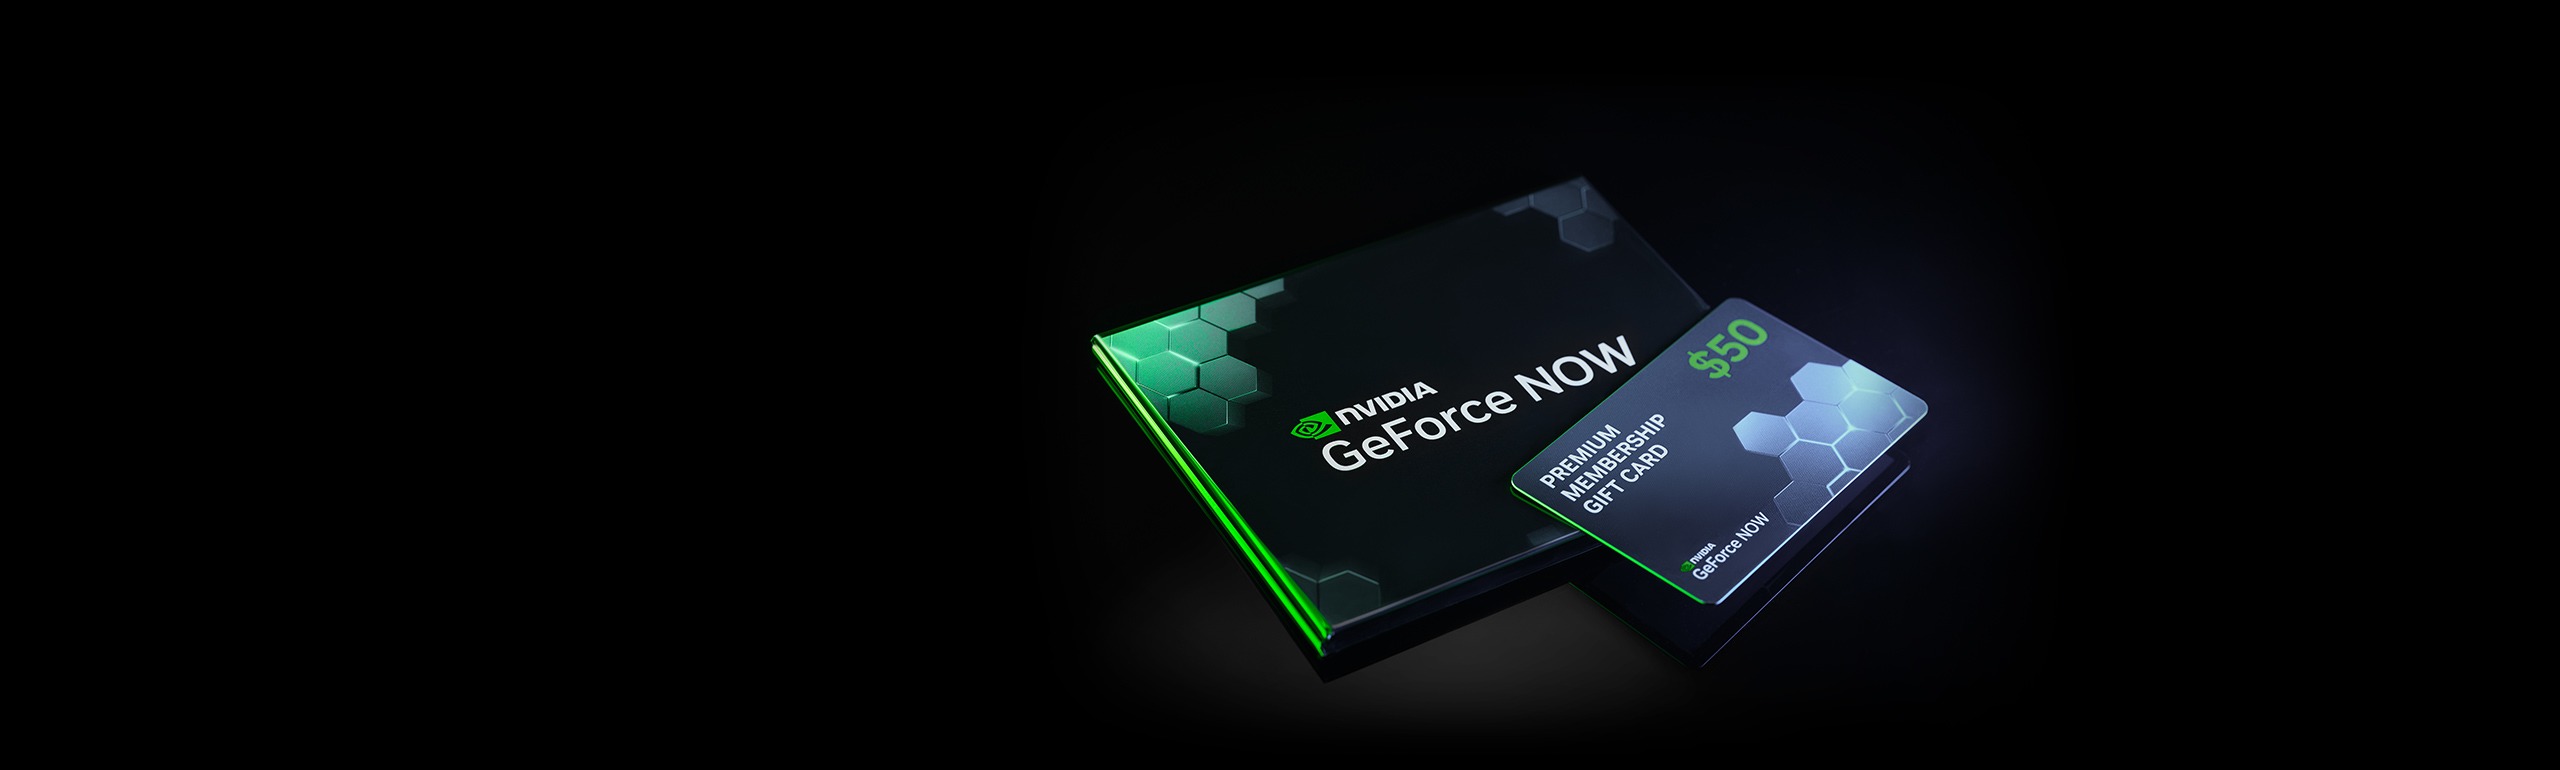 Shop GeForce NOW Gift Cards - Gifts for Gamers | NVIDIA